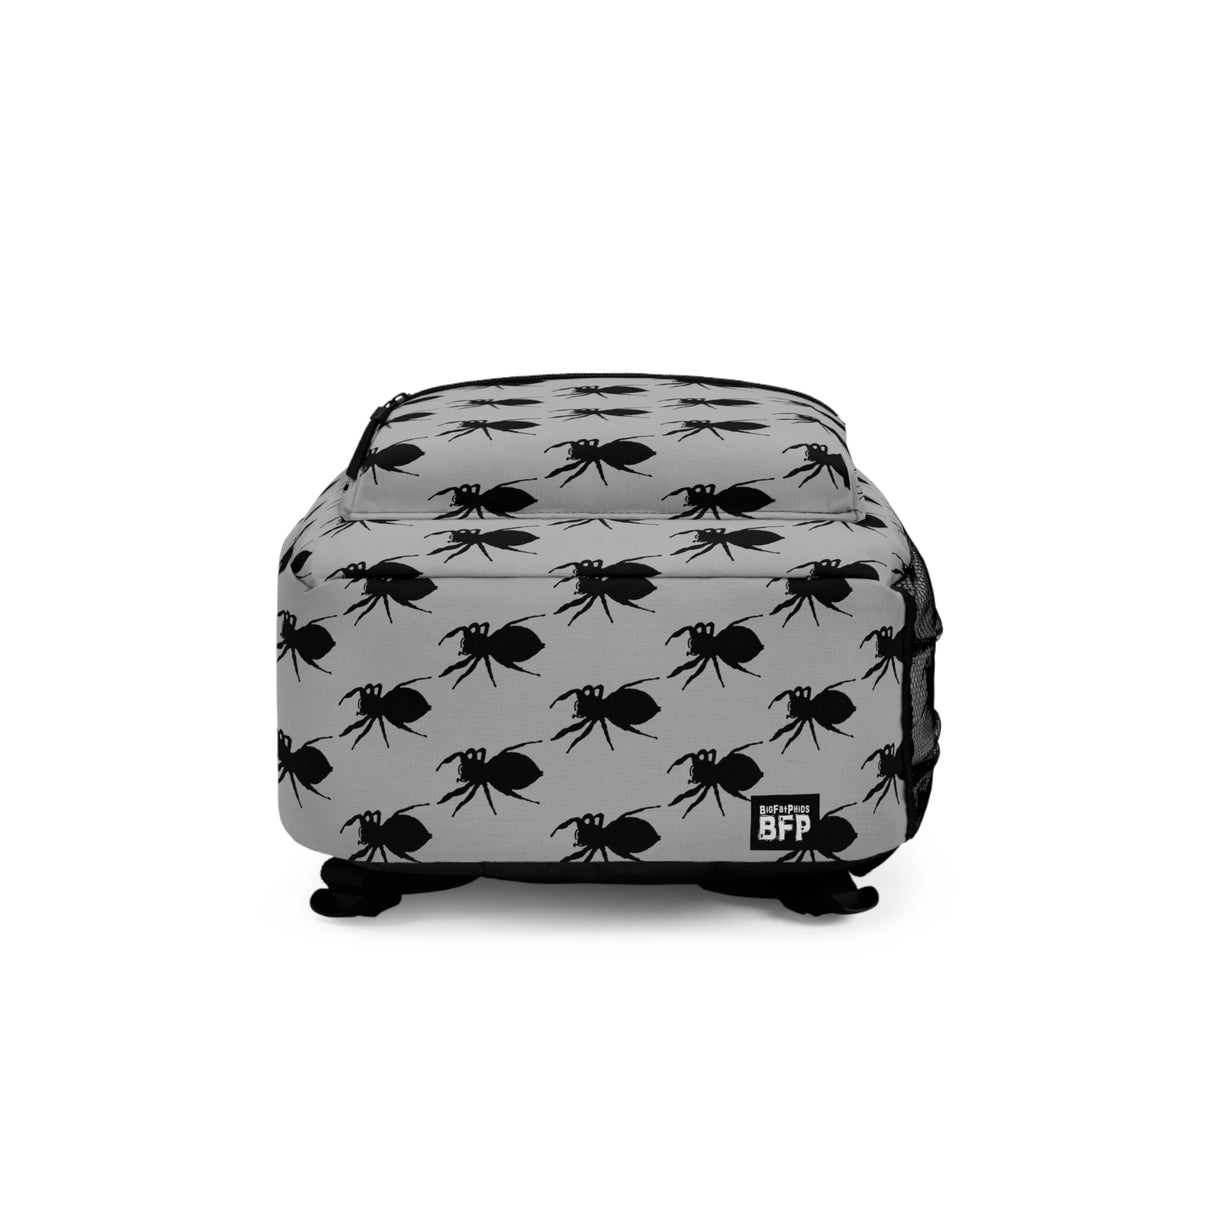 Jumping Spider Print Backpack on Grey background Made in USA